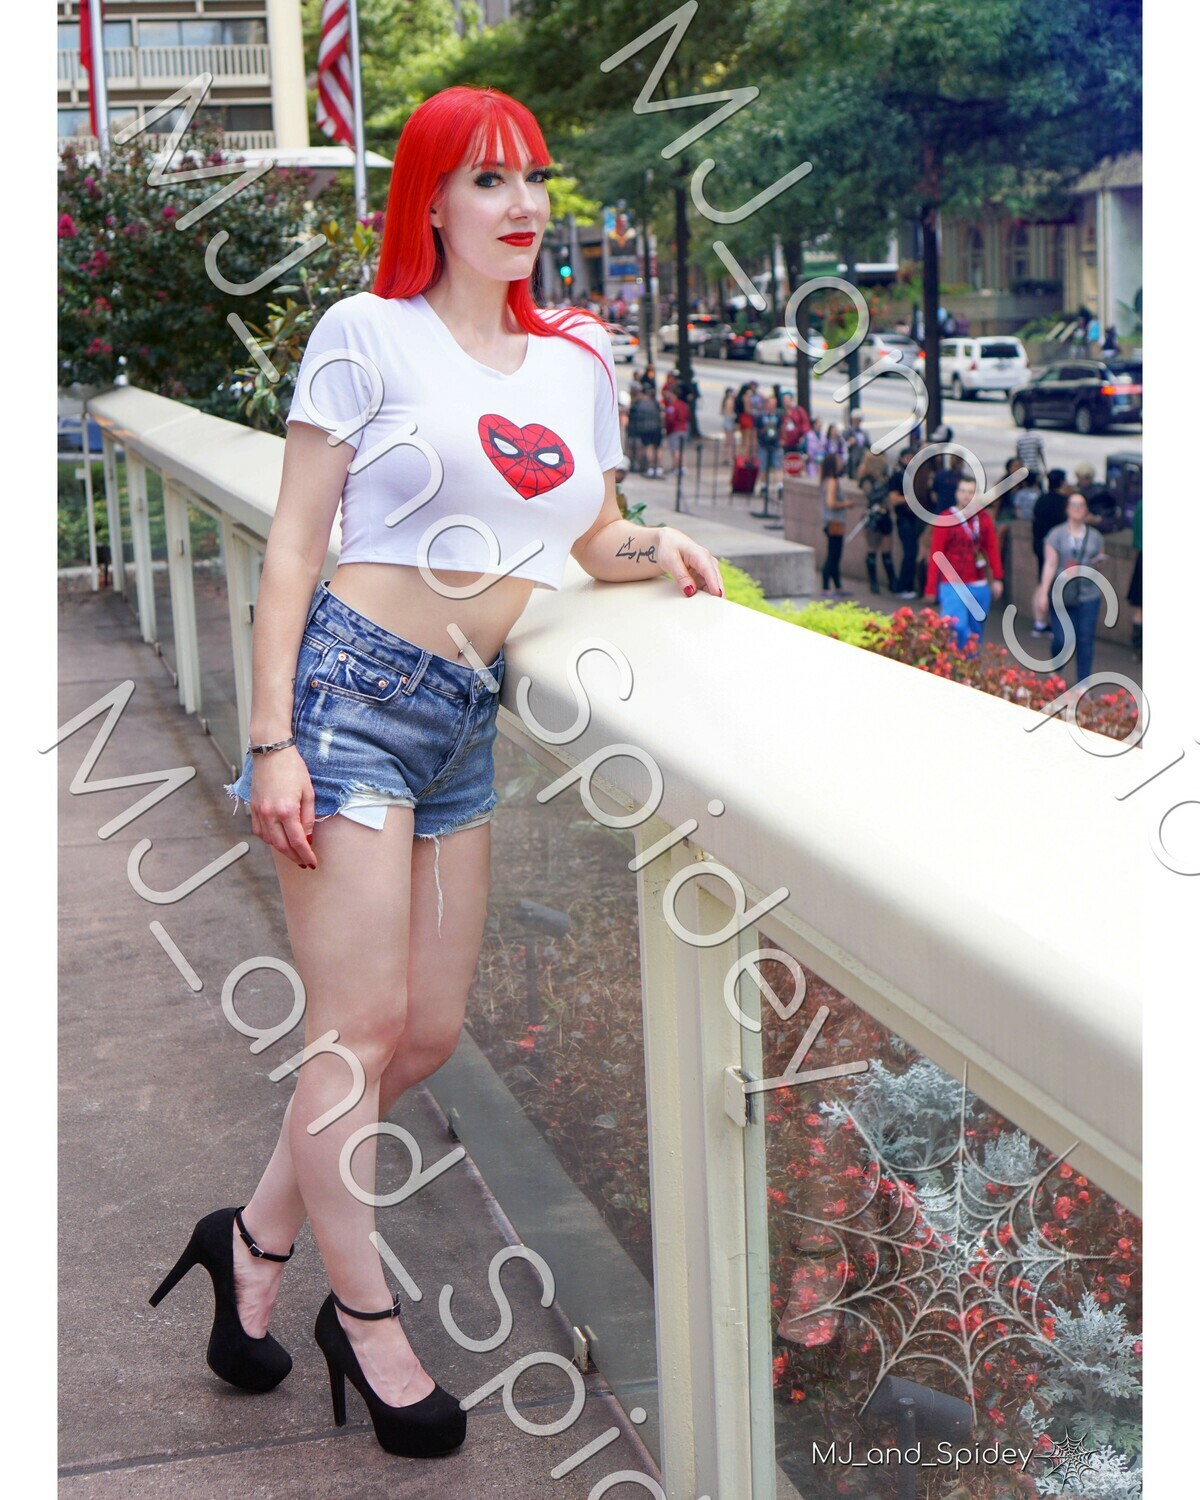 Marvel - Spider-Man - Mary Jane Watson - Classic No. 6 - 8x10 Cosplay Print (@MJ_and_Spidey, MJ and Spidey, Comics)